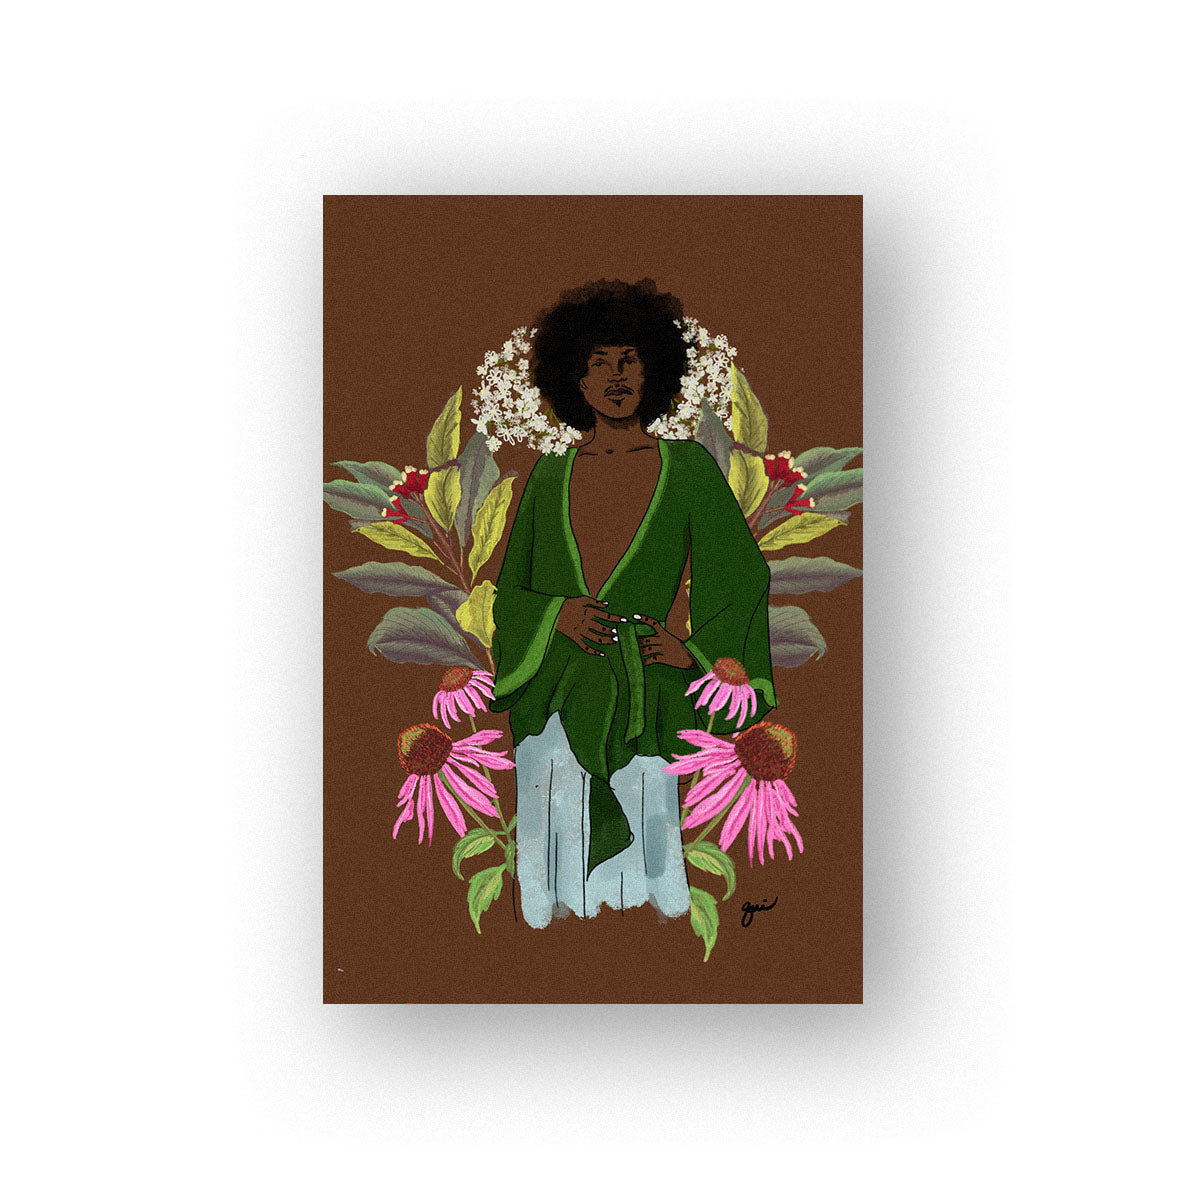 dark brown Elder art print with woman amidst Oregano, Mugwort, and Cayenne plants, representing energy and power. These herbs ease exhaustion, pain, and enhance blood flow